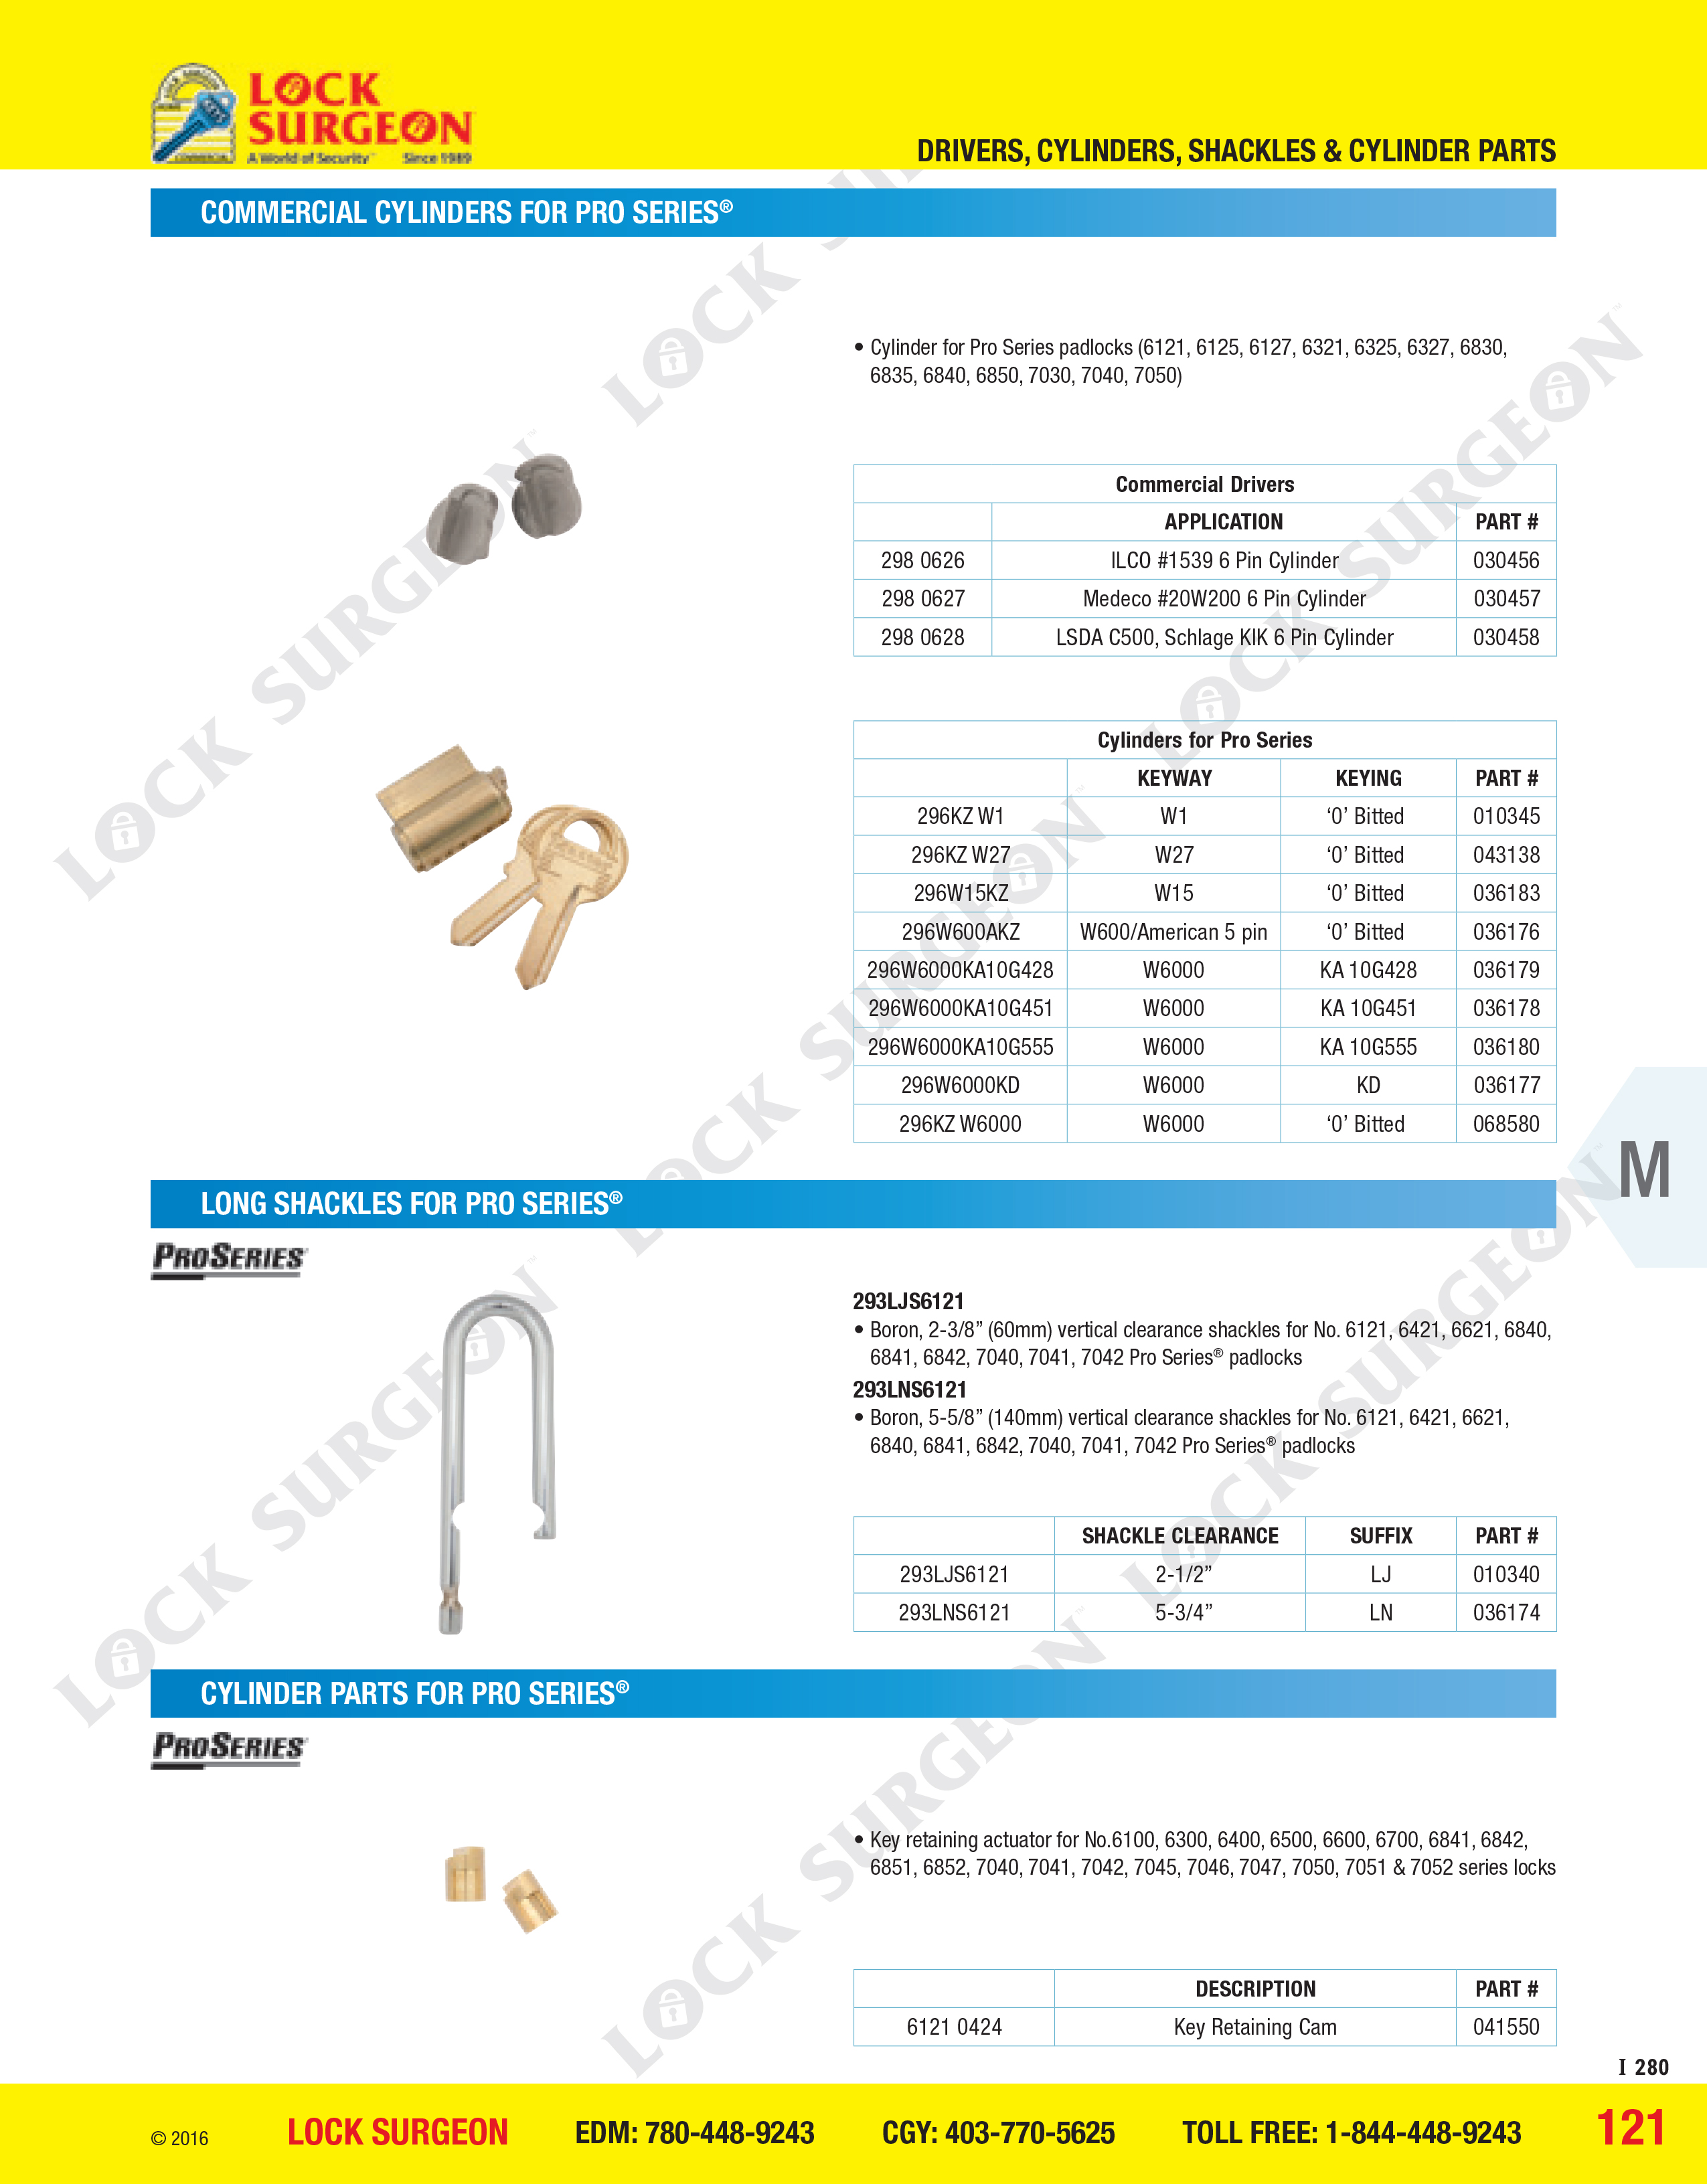 Lock Surgeon Commercial cylinders Pro Series long shackles Cylinder parts for Pro Series.